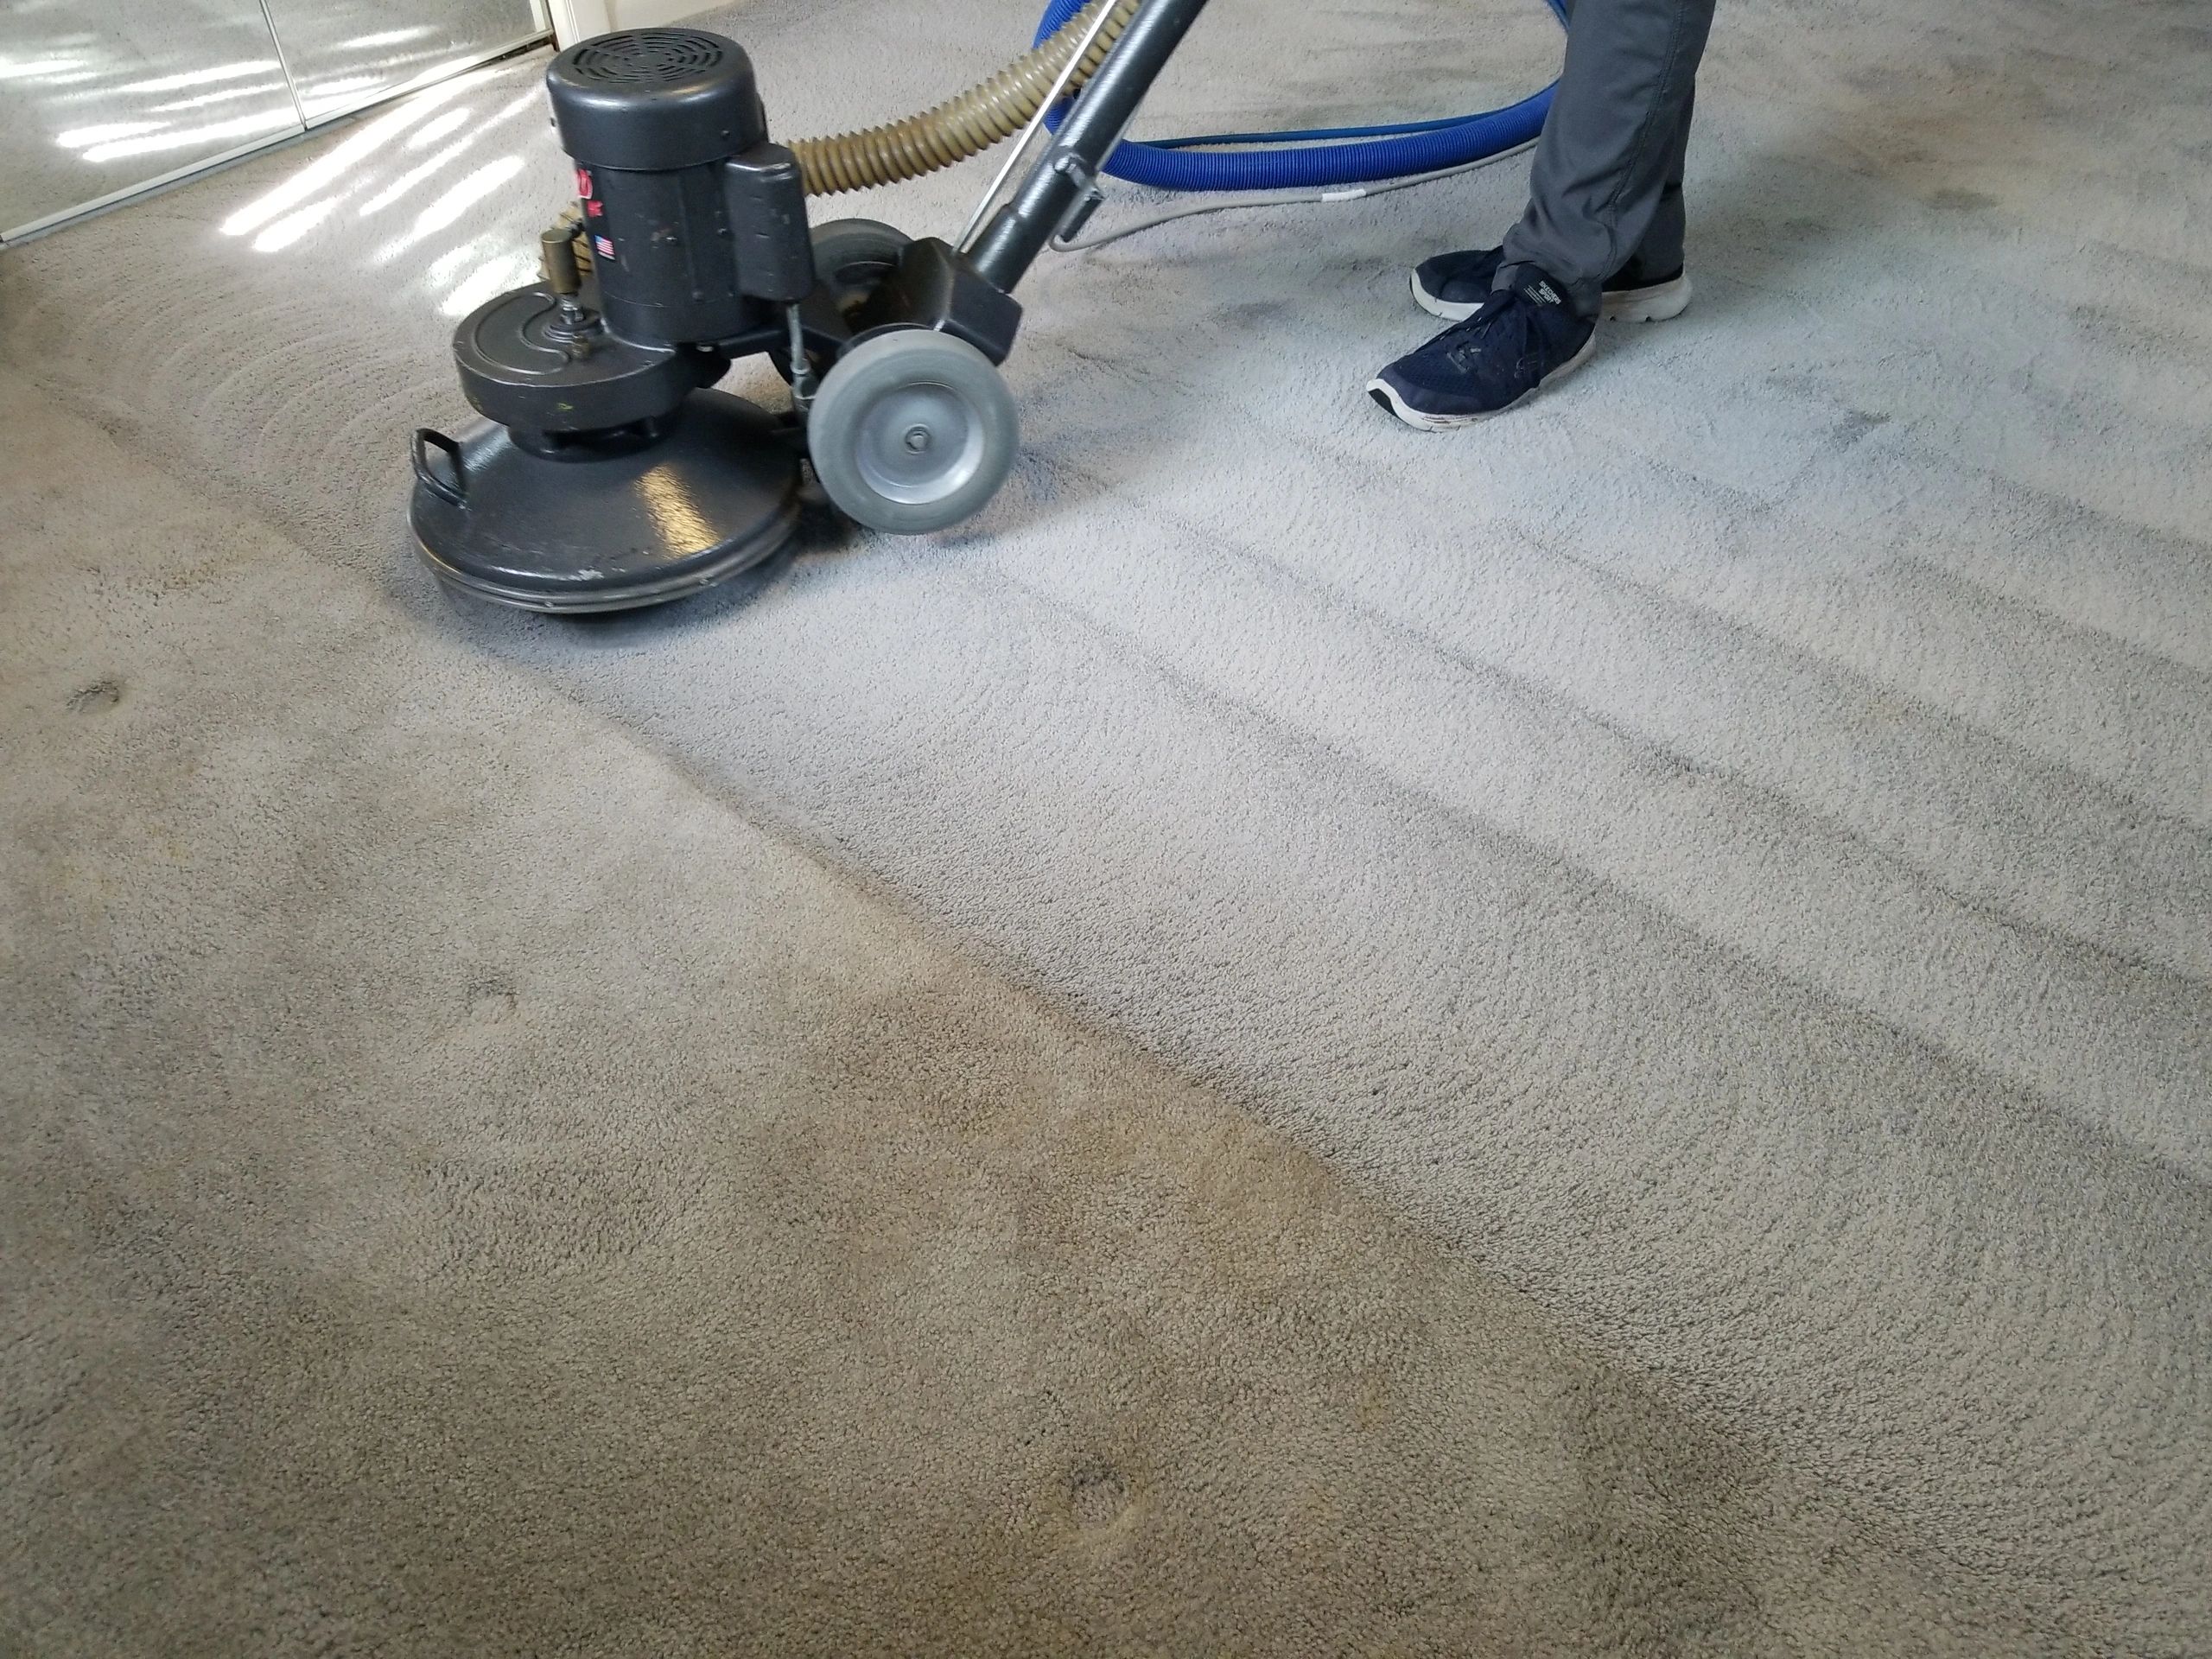 TM4 15” inch Low Moisture/Dry Carpet and Hard Floor Cleaning